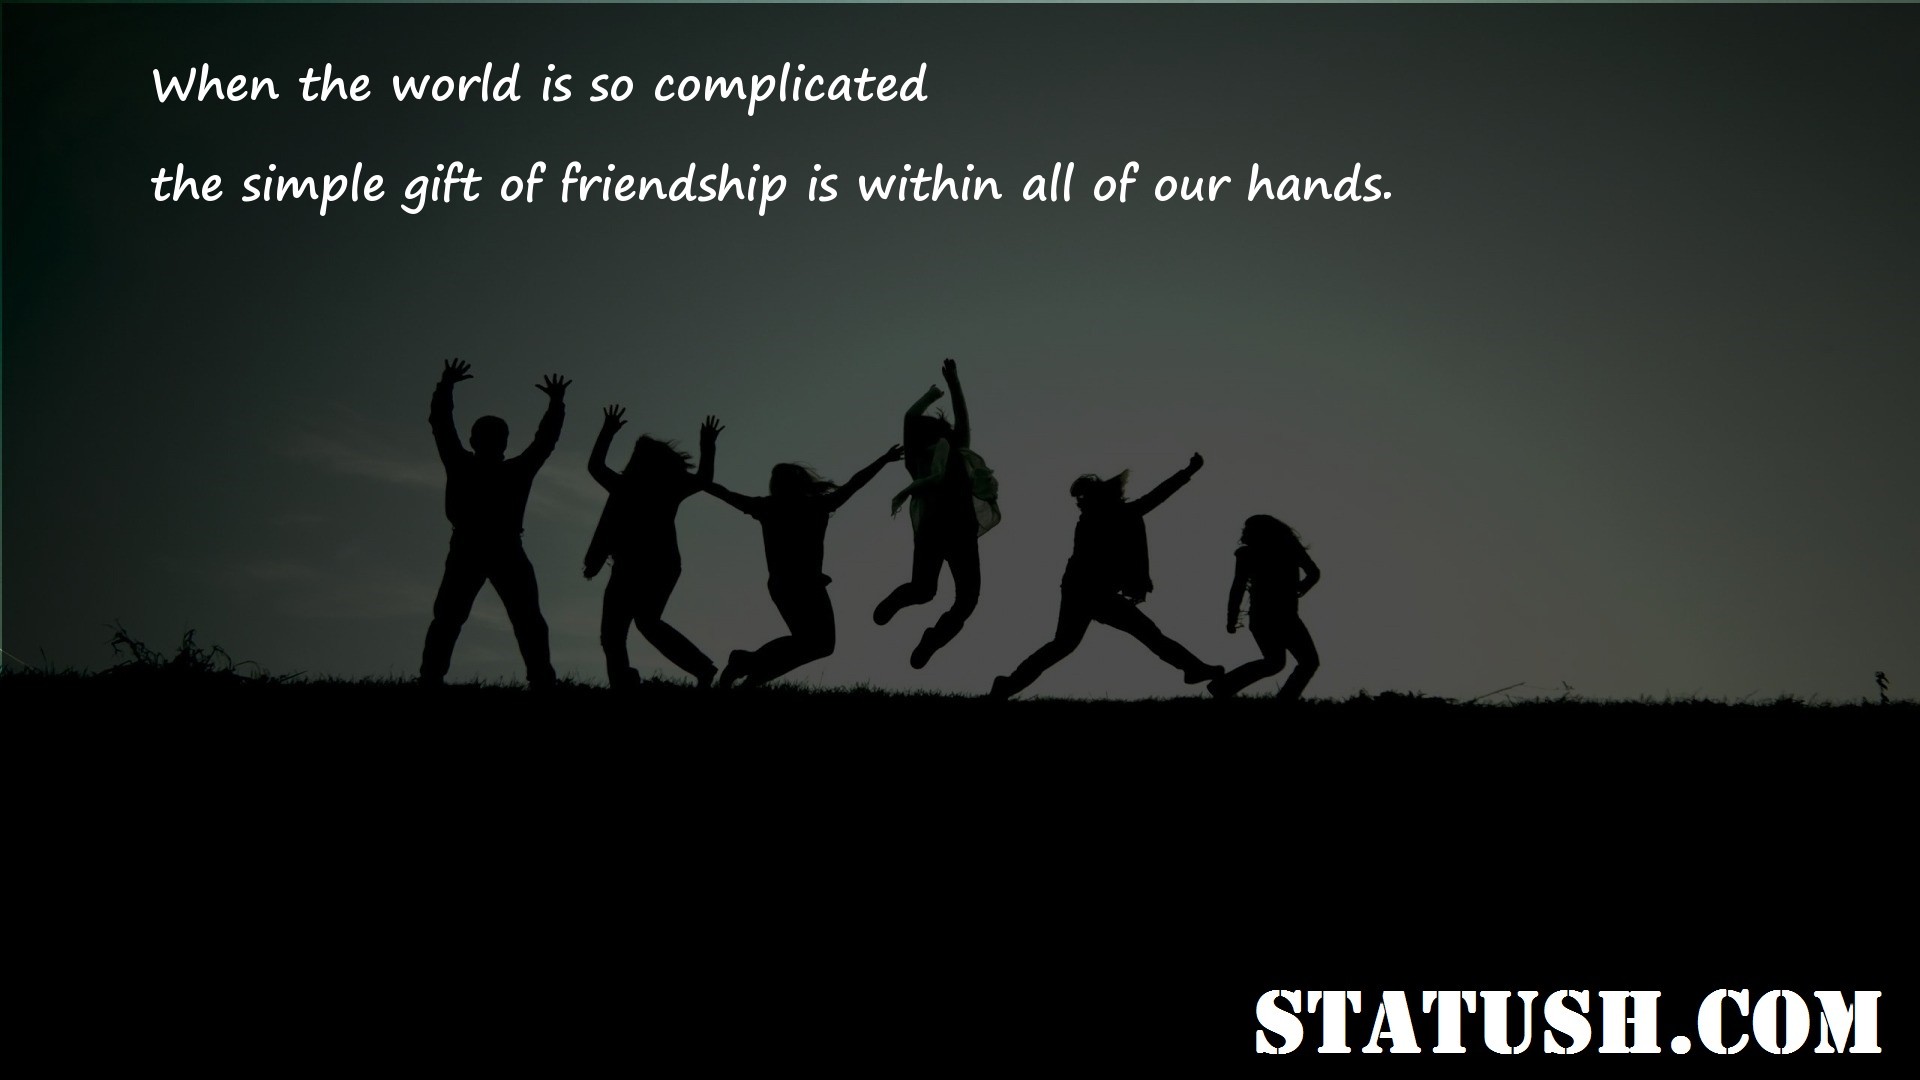 When the world is so complicated - Friendship Quotes at statush.com